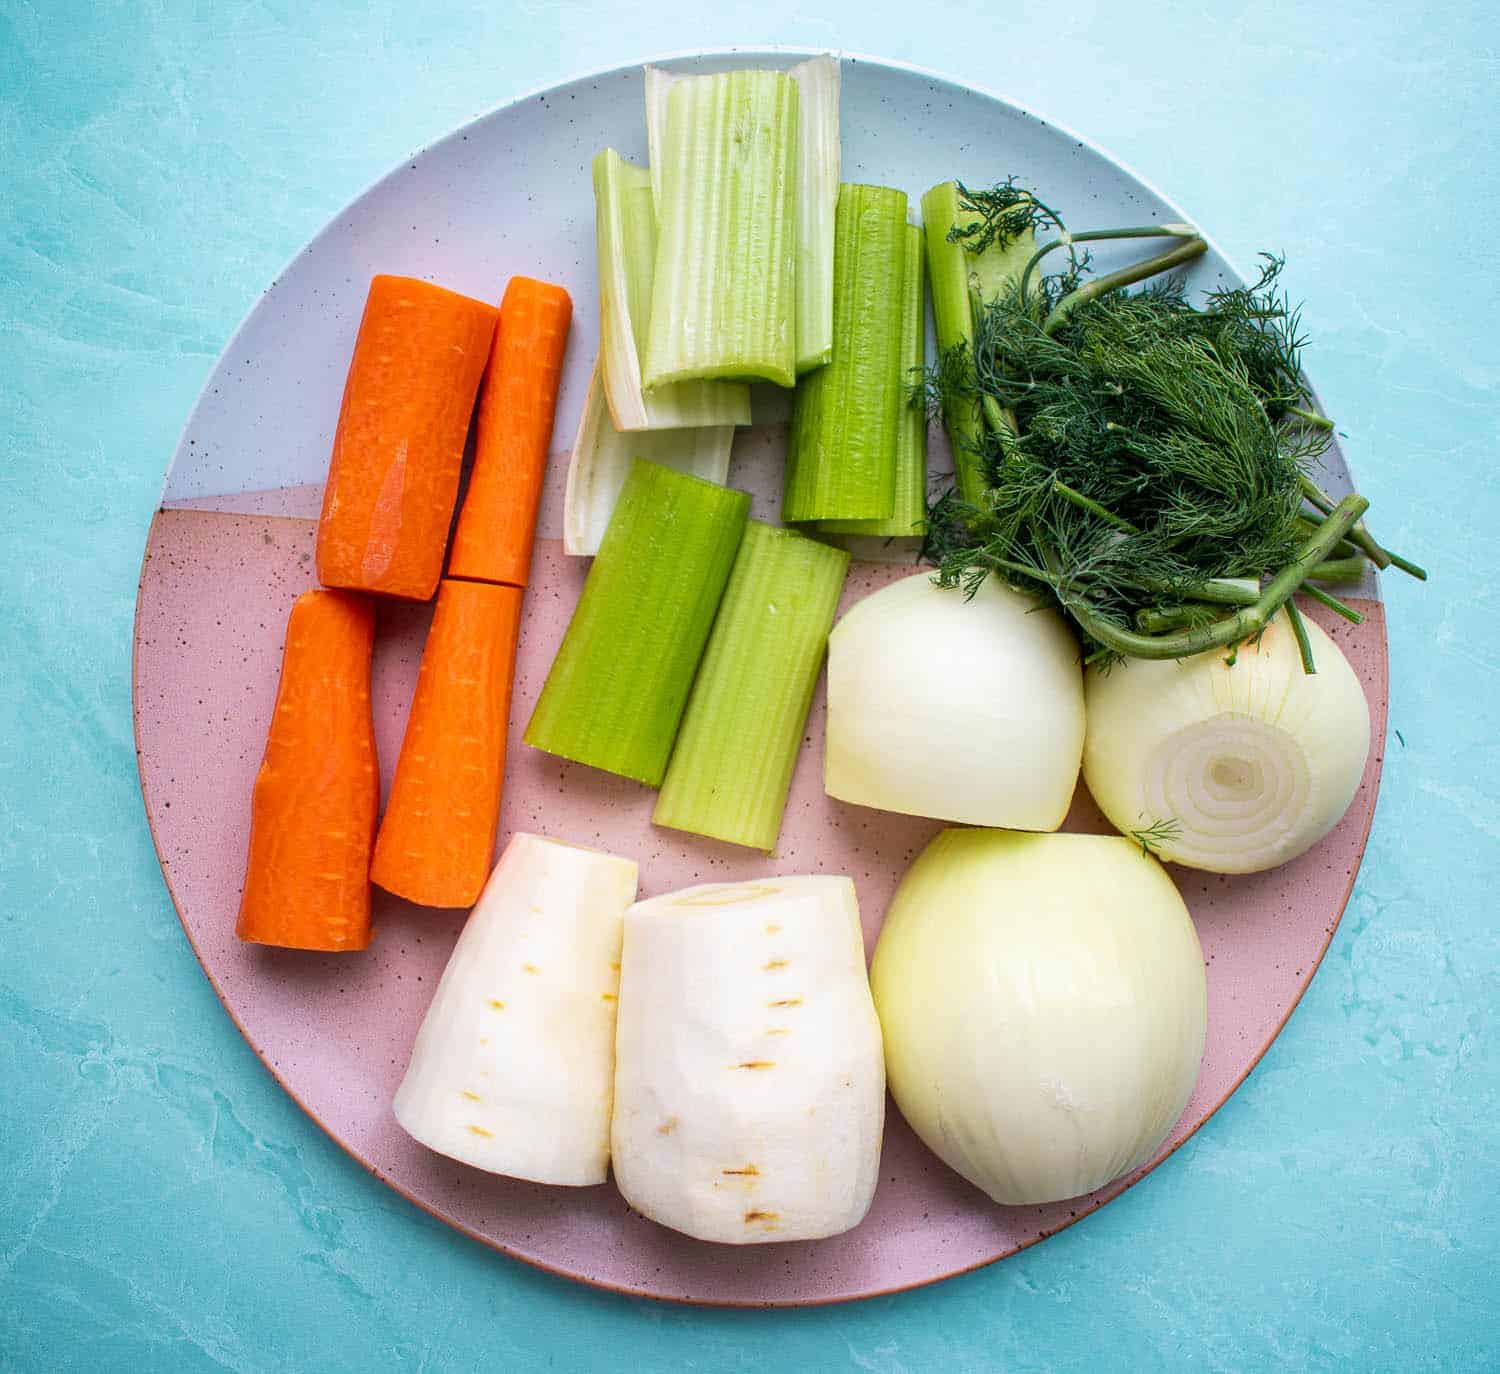 Plate of raw vegetables cut up to put into a homemade stock